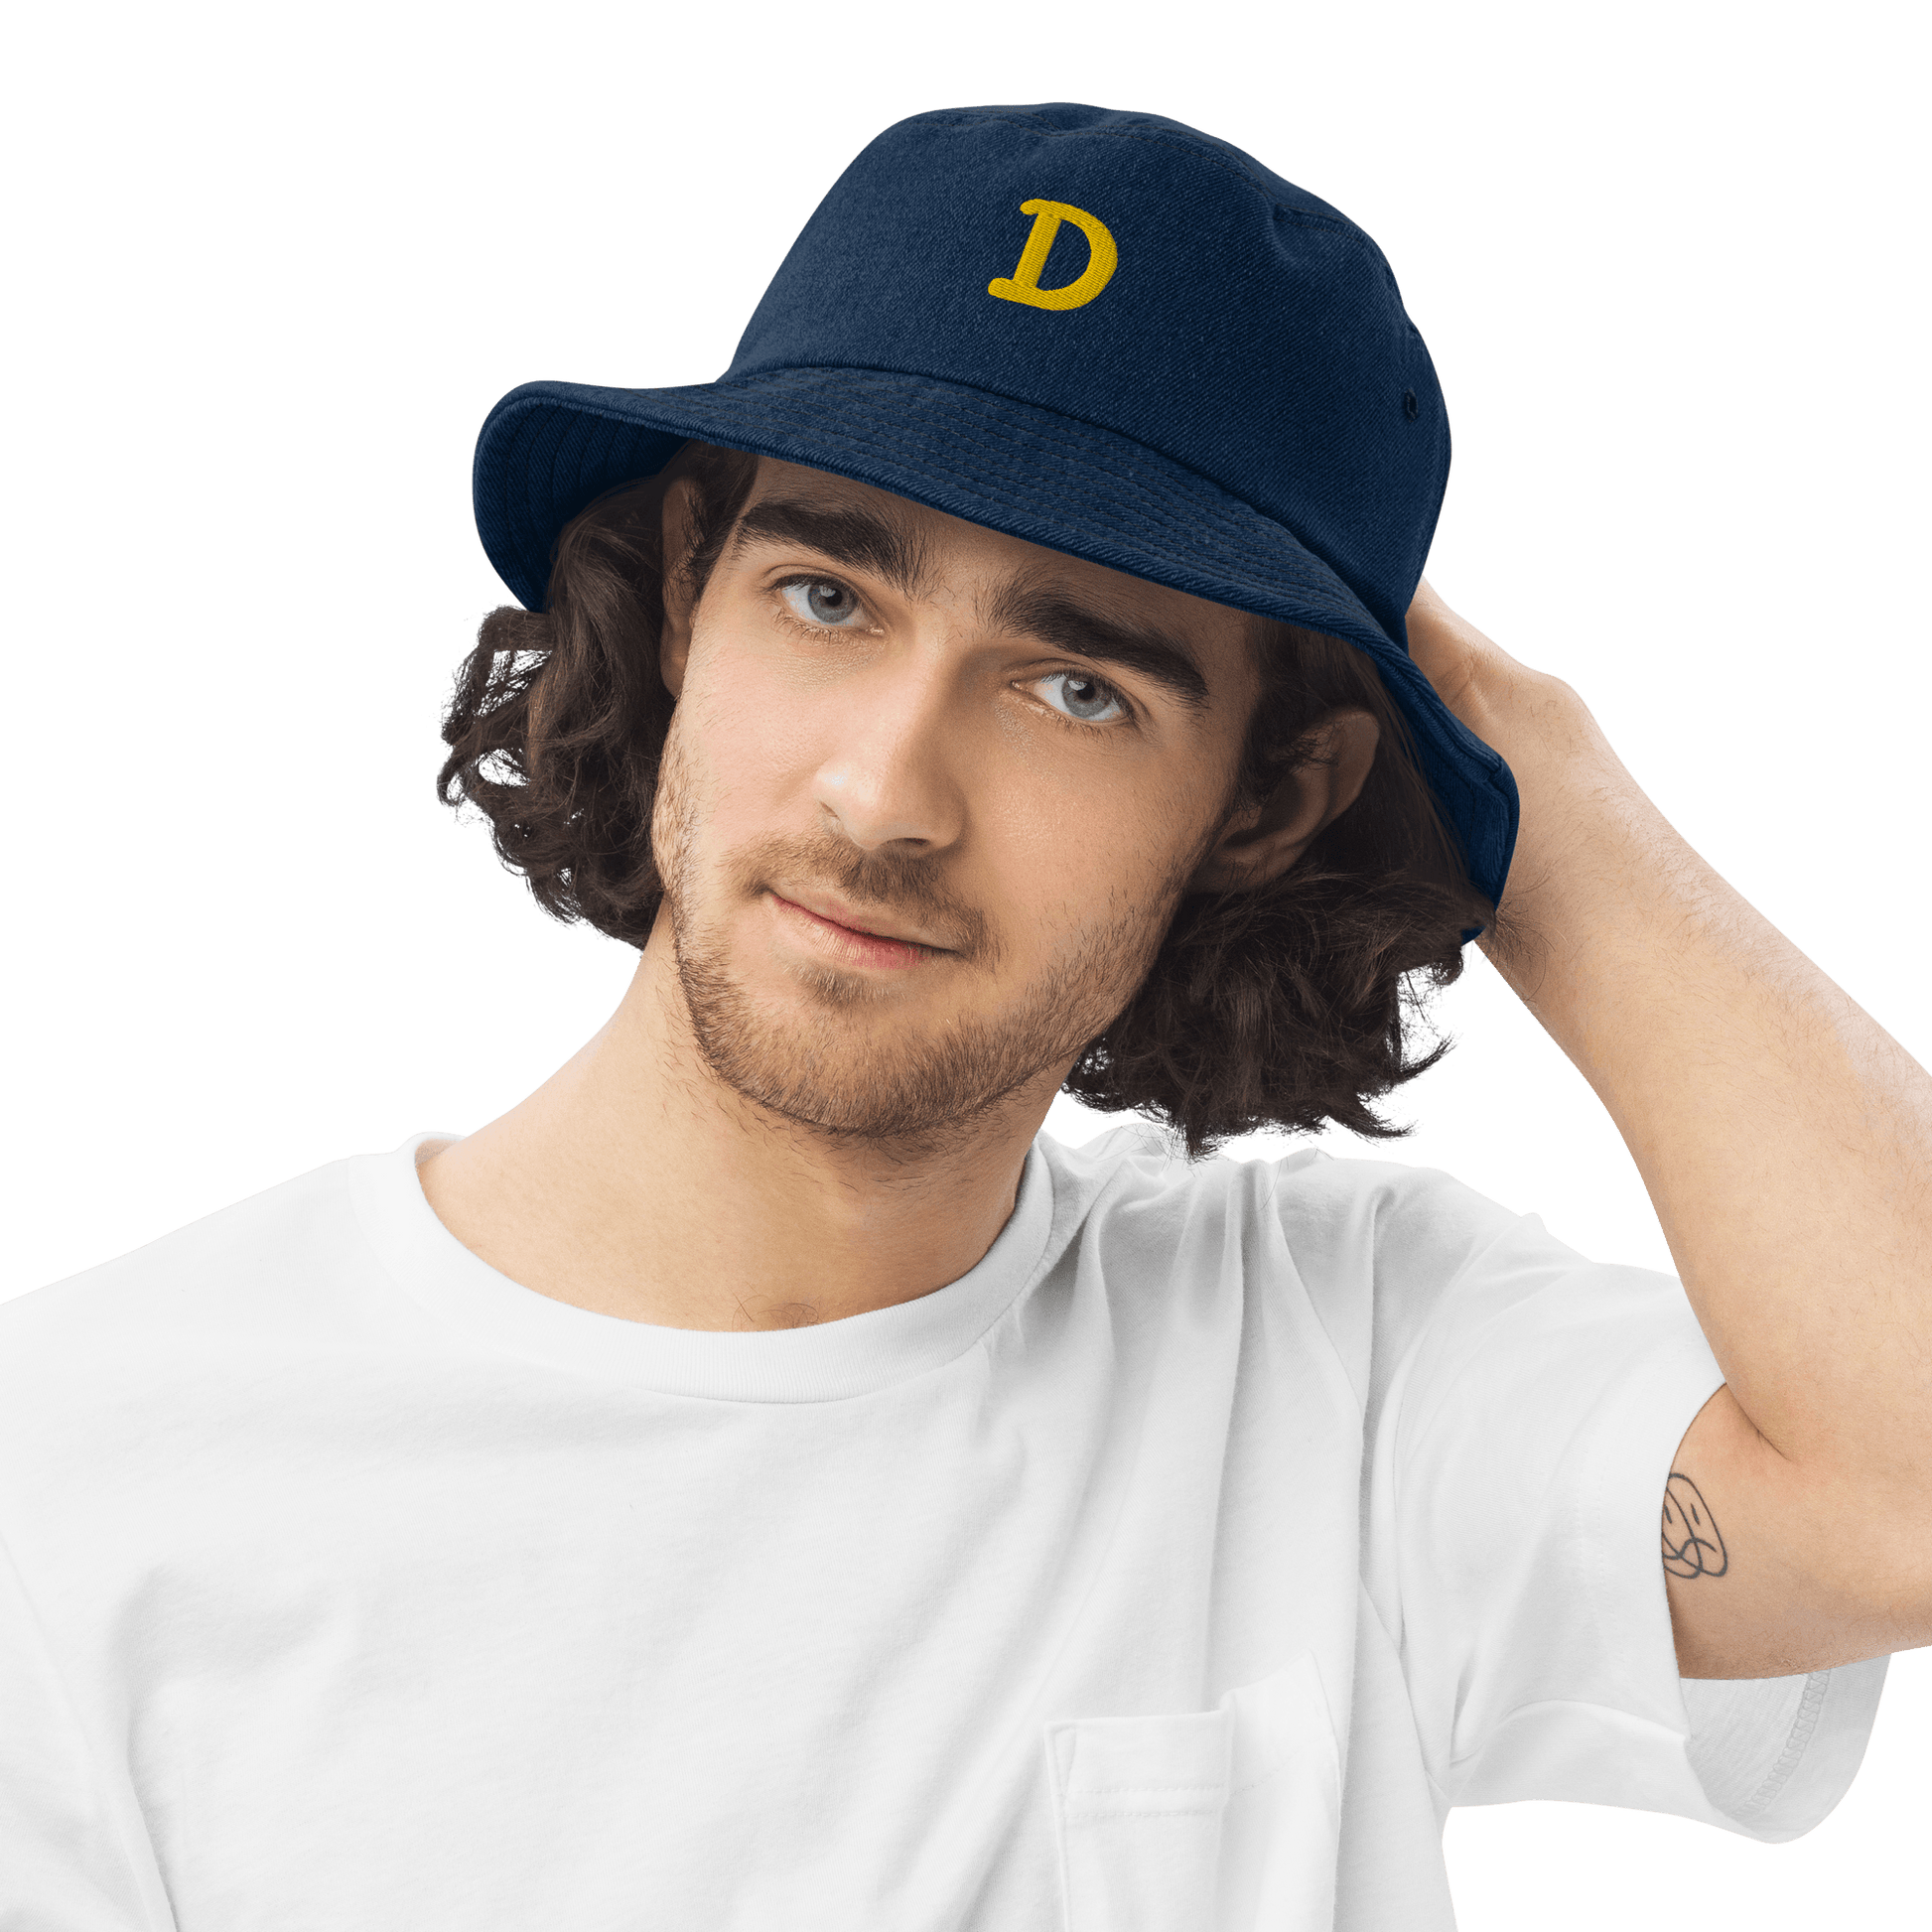 Detroit 'Old French D' Denim Bucket Hat | Yellow Embroidery - Circumspice Michigan